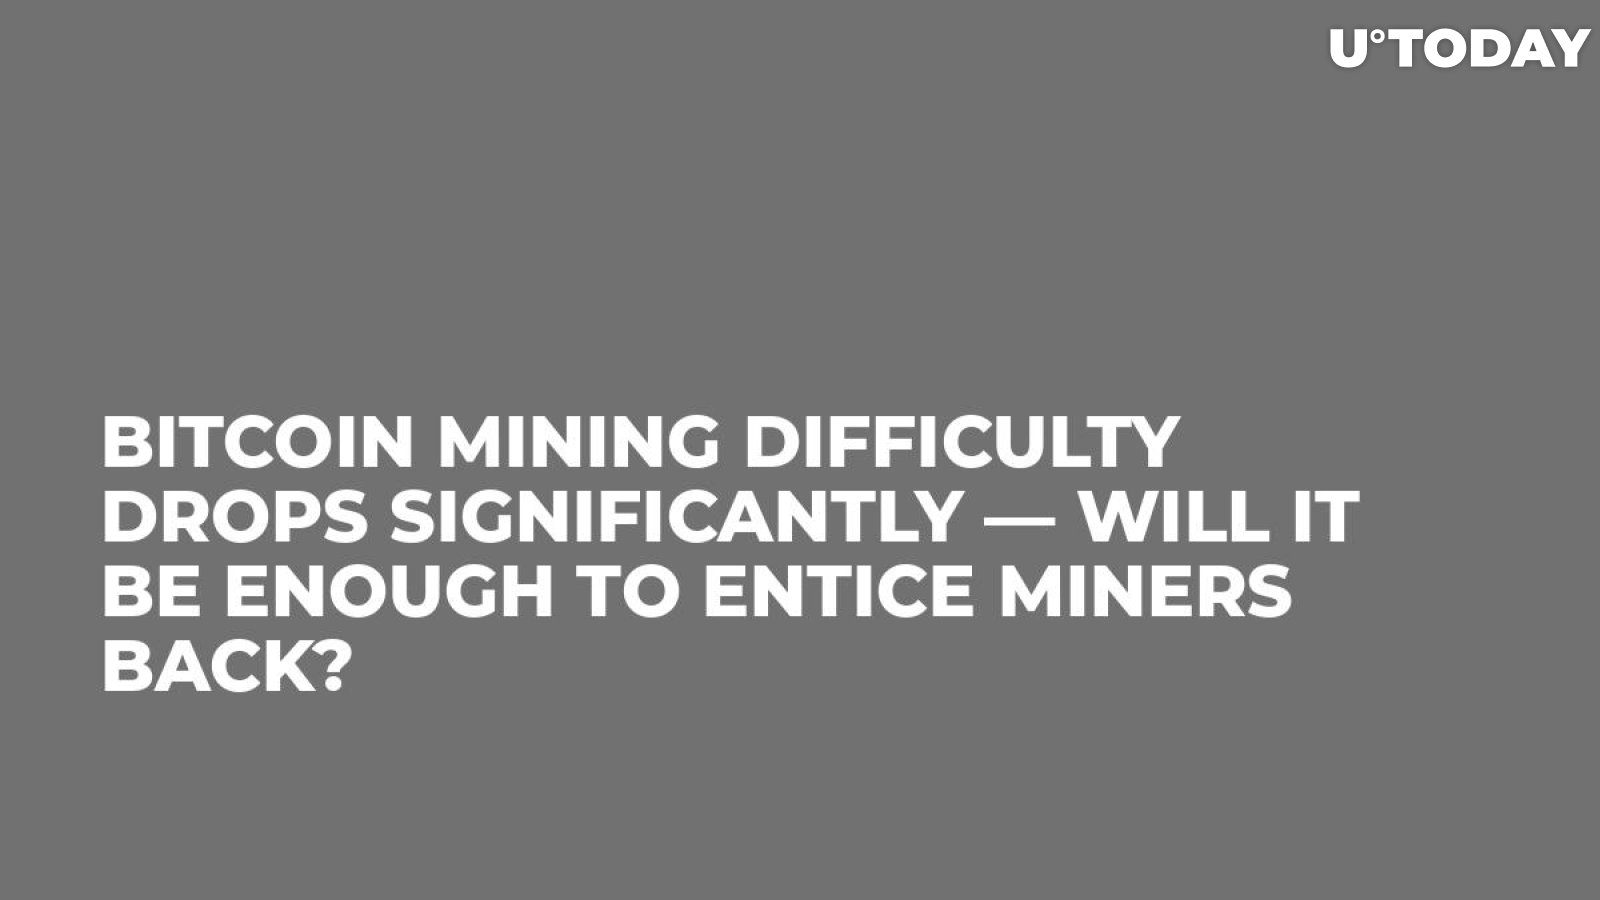 Bitcoin Mining Difficulty Drops Significantly — Will it be Enough to Entice Miners Back?